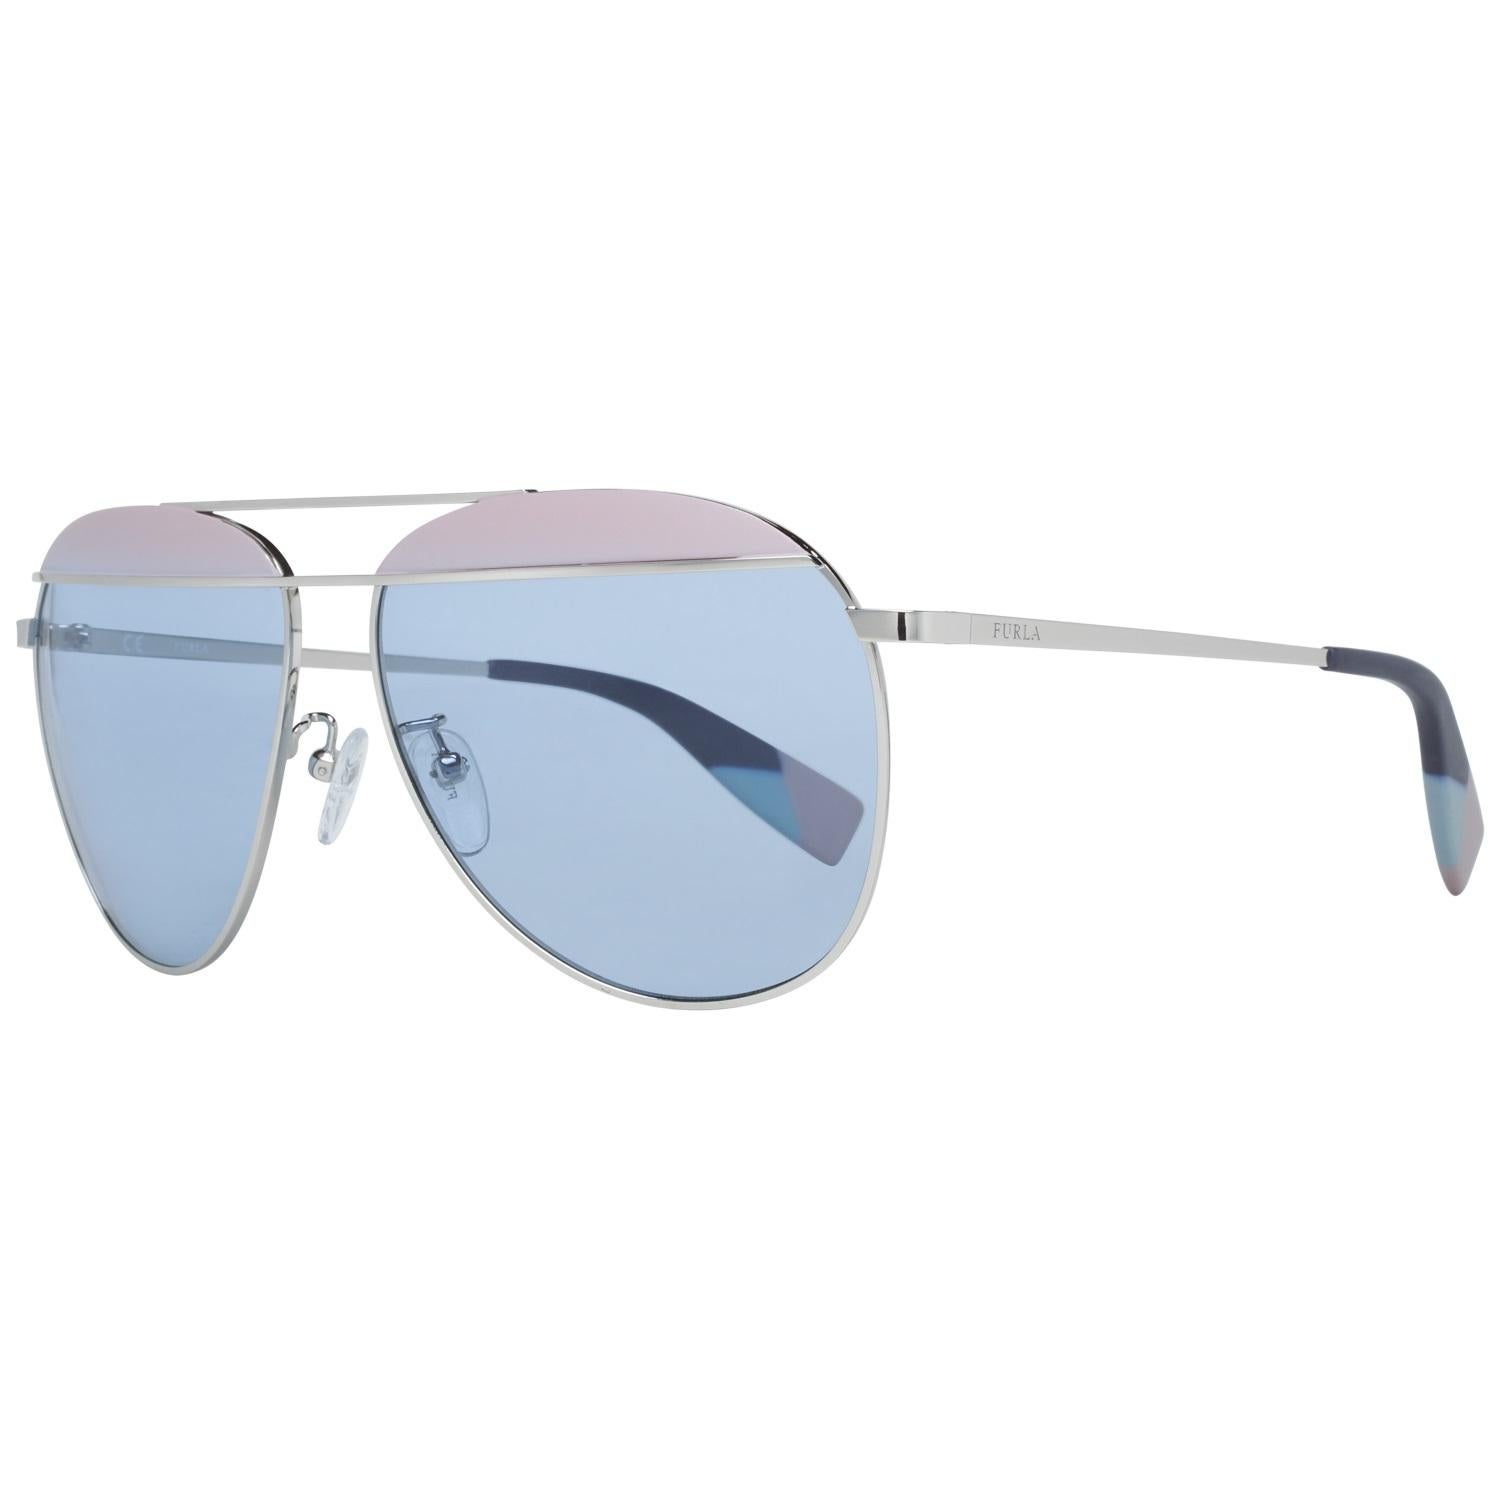 Details

MATERIAL: Metal

COLOR: Silver

MODEL: SFU236 590523

GENDER: Women

COUNTRY OF MANUFACTURE: China

TYPE: Sunglasses

ORIGINAL CASE?: Yes

STYLE: Aviator

OCCASION: Casual

FEATURES: Lightweight

LENS COLOR: Blue

LENS TECHNOLOGY: No